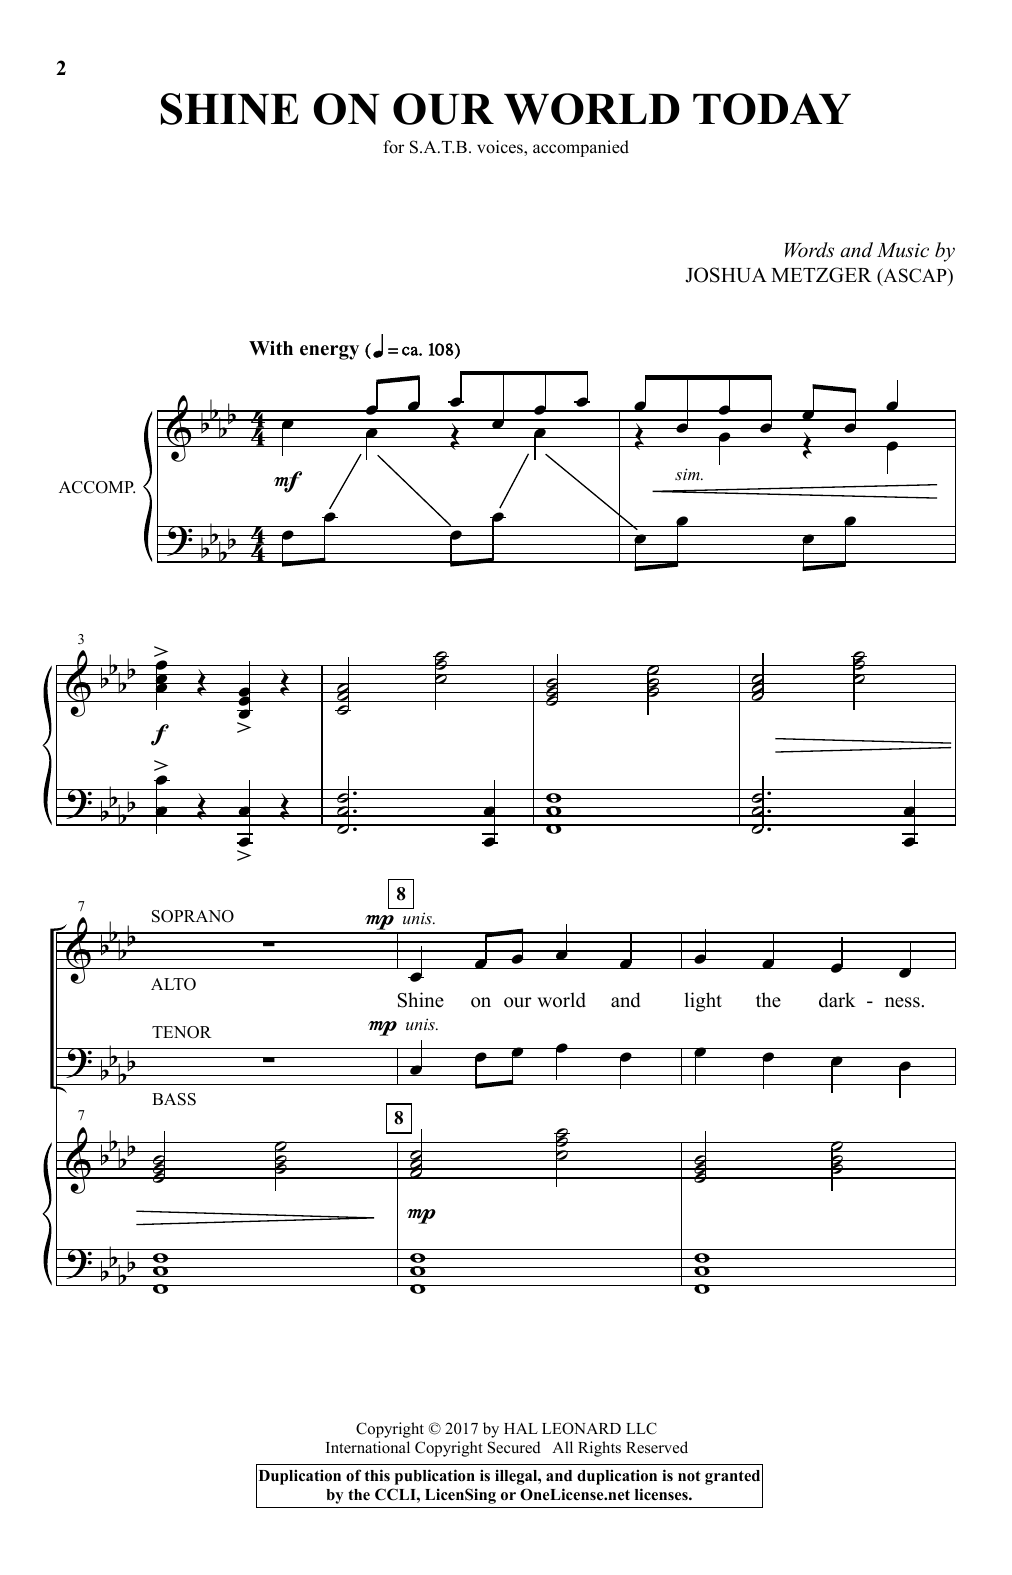 Download Joshua Metzger Shine On Our World Today Sheet Music